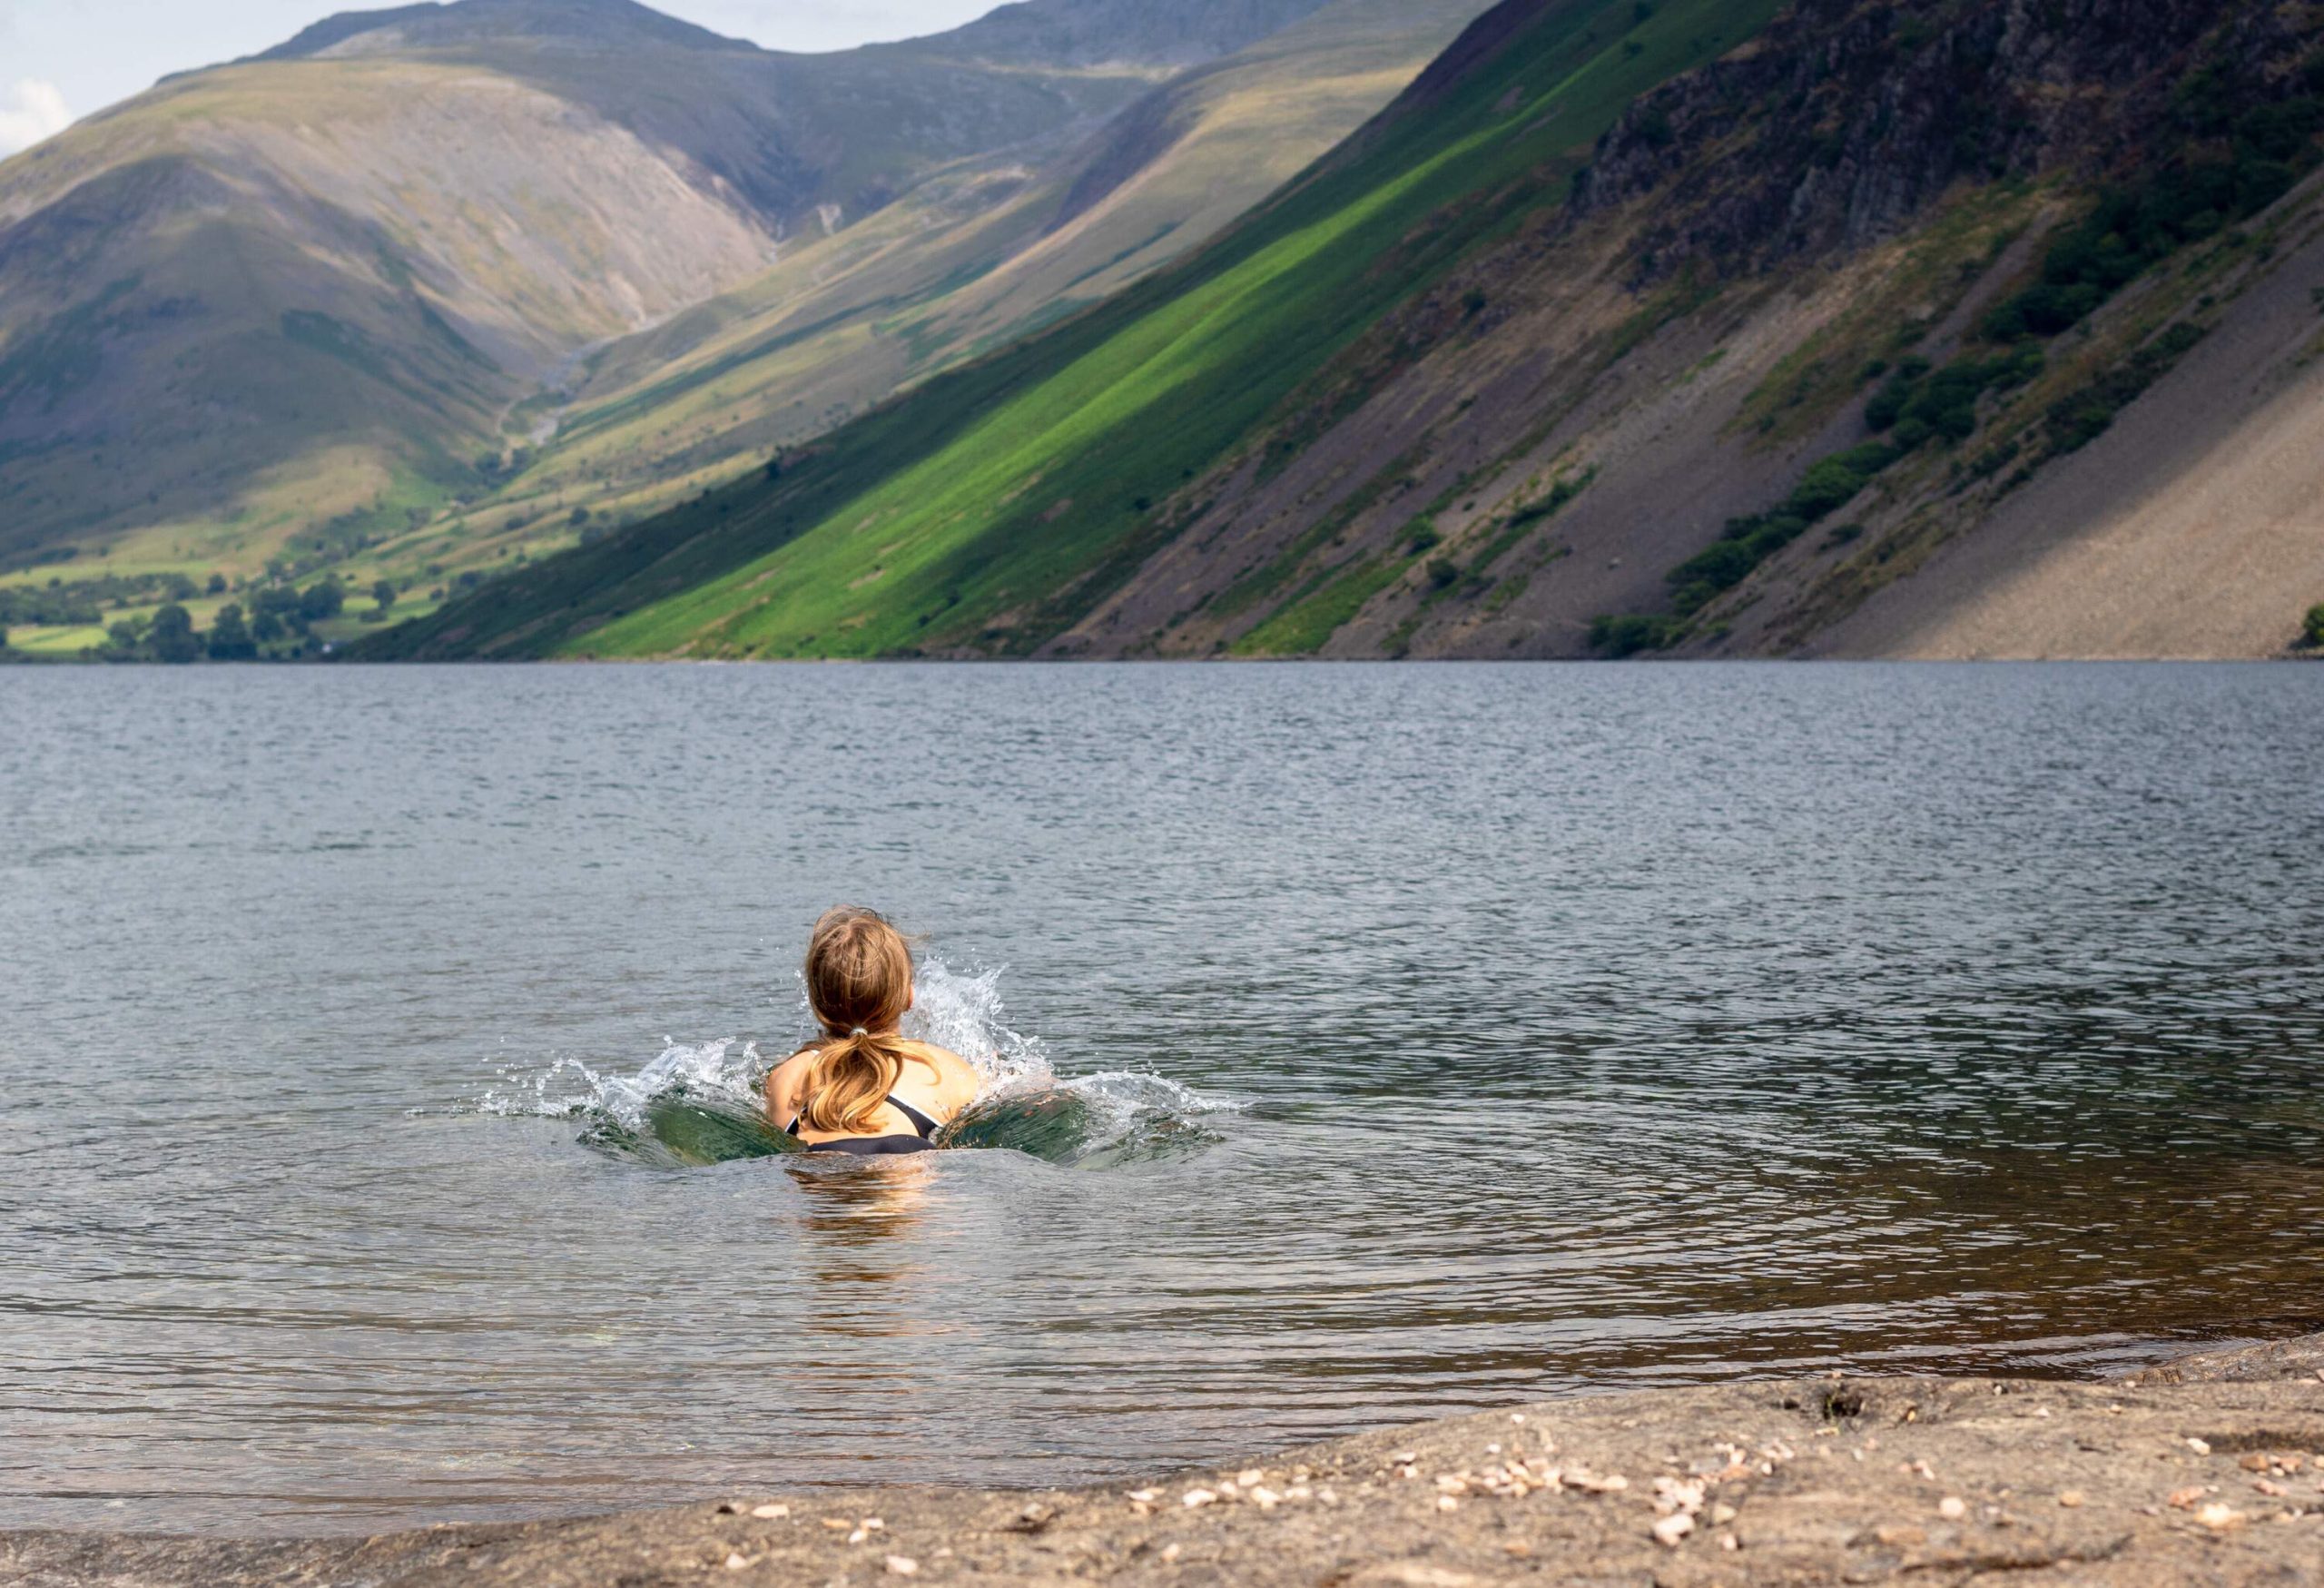 Beautiful landscape view of Wast Water in the Lake District National Park in the UK. A girl relaxing and enjoying refreshing bath in cold water on a beautiful sunny day.